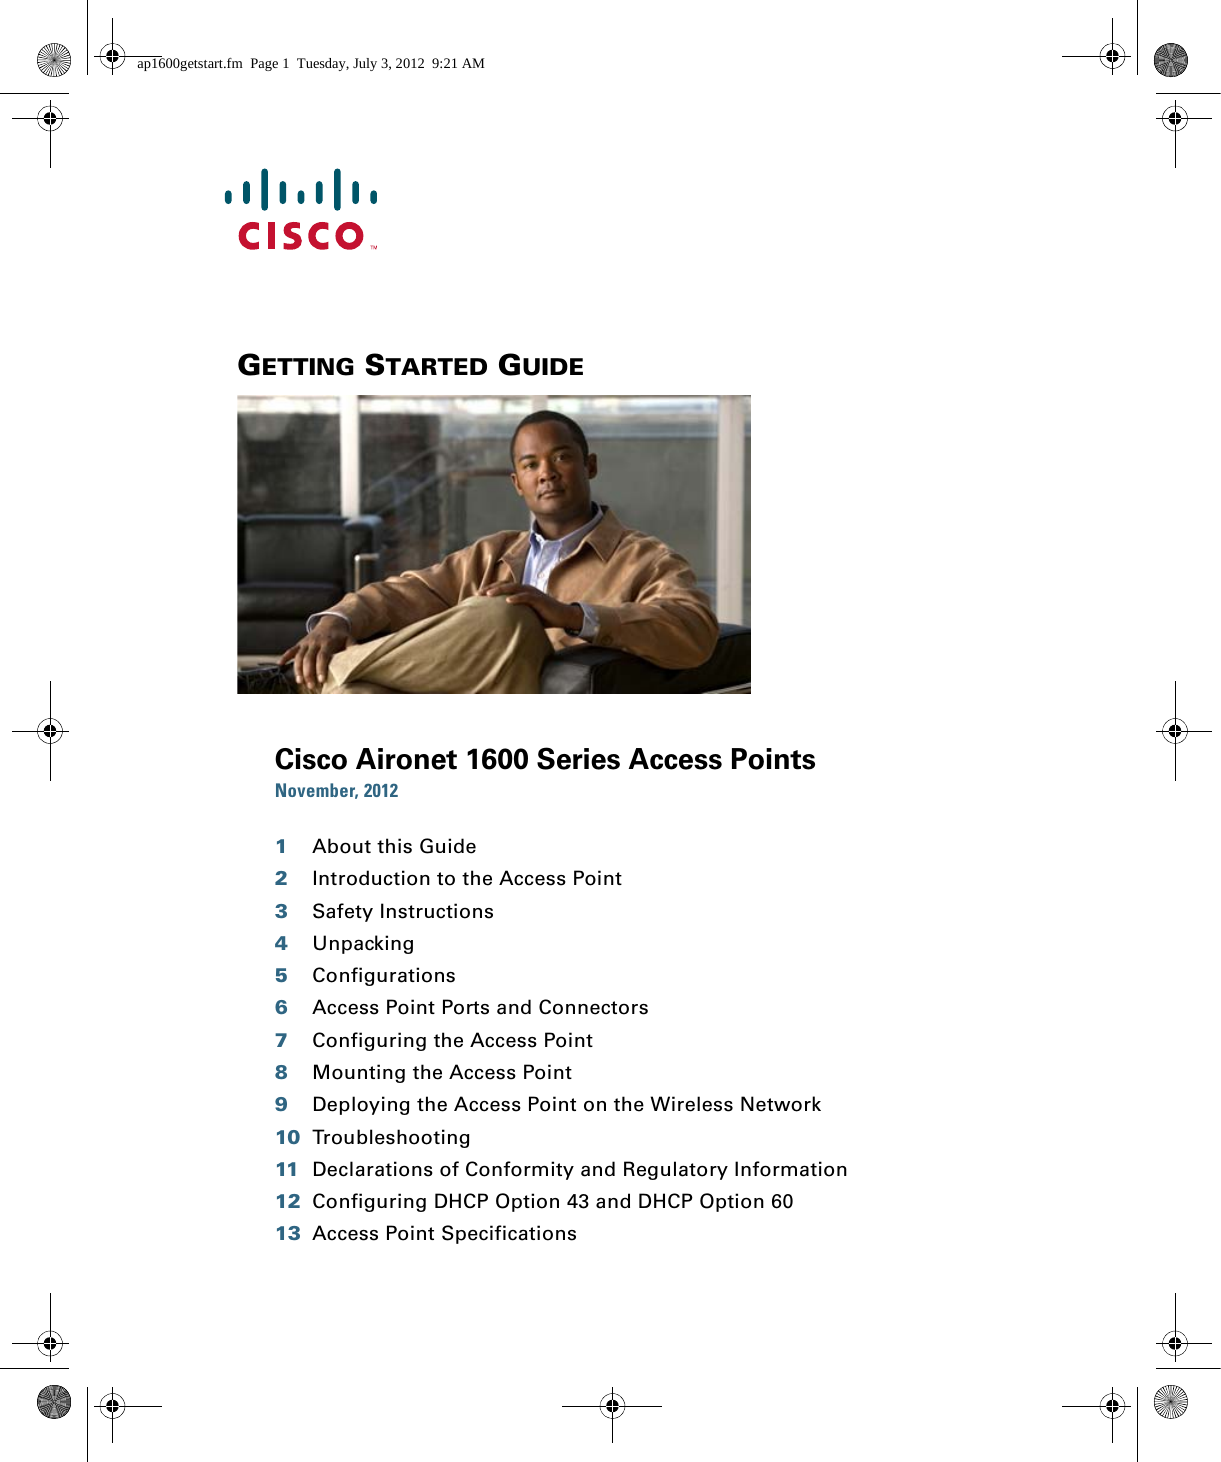  GETTING STARTED GUIDE Cisco Aironet 1600 Series Access PointsNovember, 20121About this Guide2Introduction to the Access Point3Safety Instructions4Unpacking5Configurations6Access Point Ports and Connectors7Configuring the Access Point8Mounting the Access Point9Deploying the Access Point on the Wireless Network10 Troubleshooting11 Declarations of Conformity and Regulatory Information12 Configuring DHCP Option 43 and DHCP Option 6013 Access Point Specificationsap1600getstart.fm  Page 1  Tuesday, July 3, 2012  9:21 AM